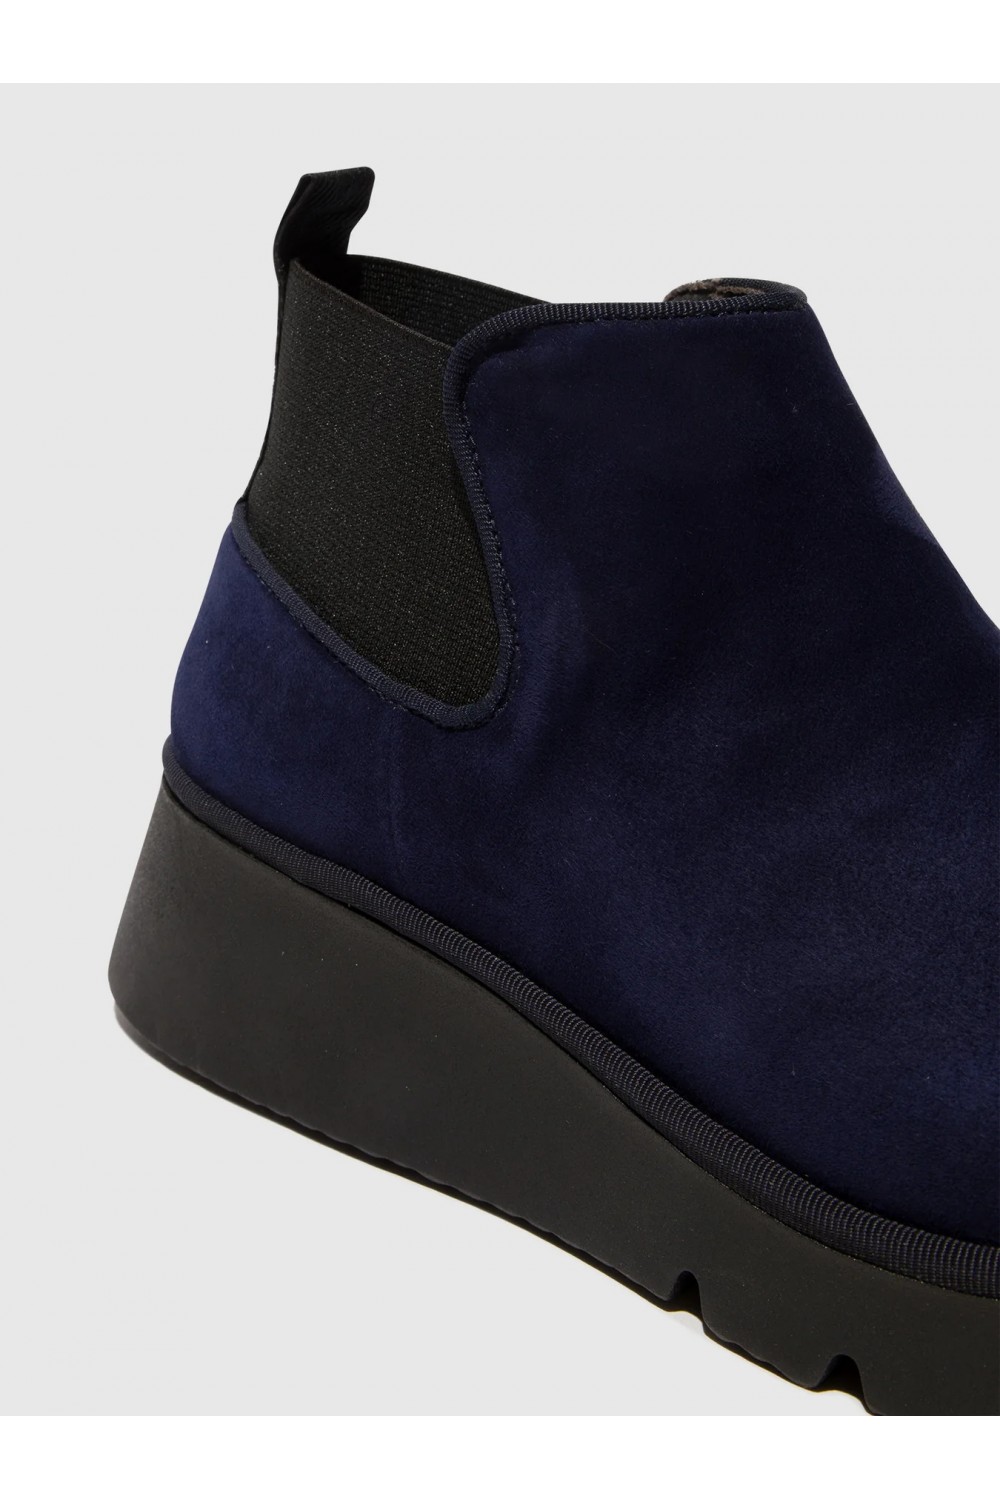 FLY LONDON Pada403 Pull On Ankle Boot Kid Suede Navy